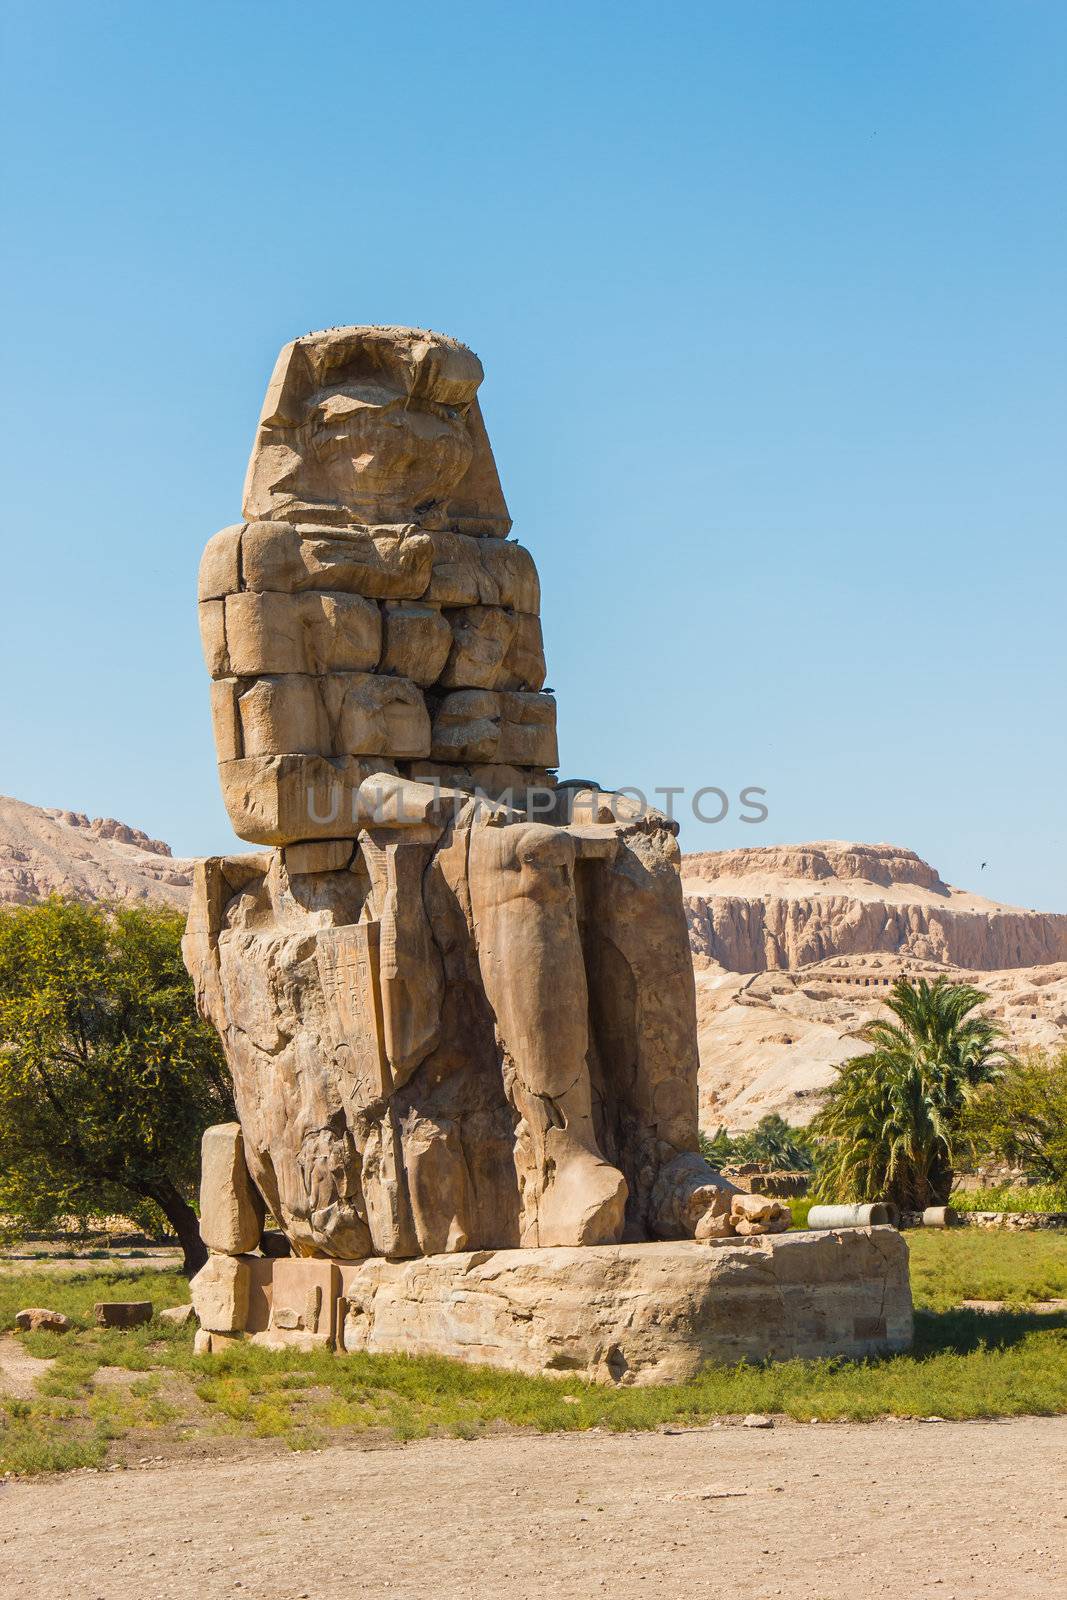 Colossi of Memnon, Valley of Kings, Luxor, Egypt, 2012 year